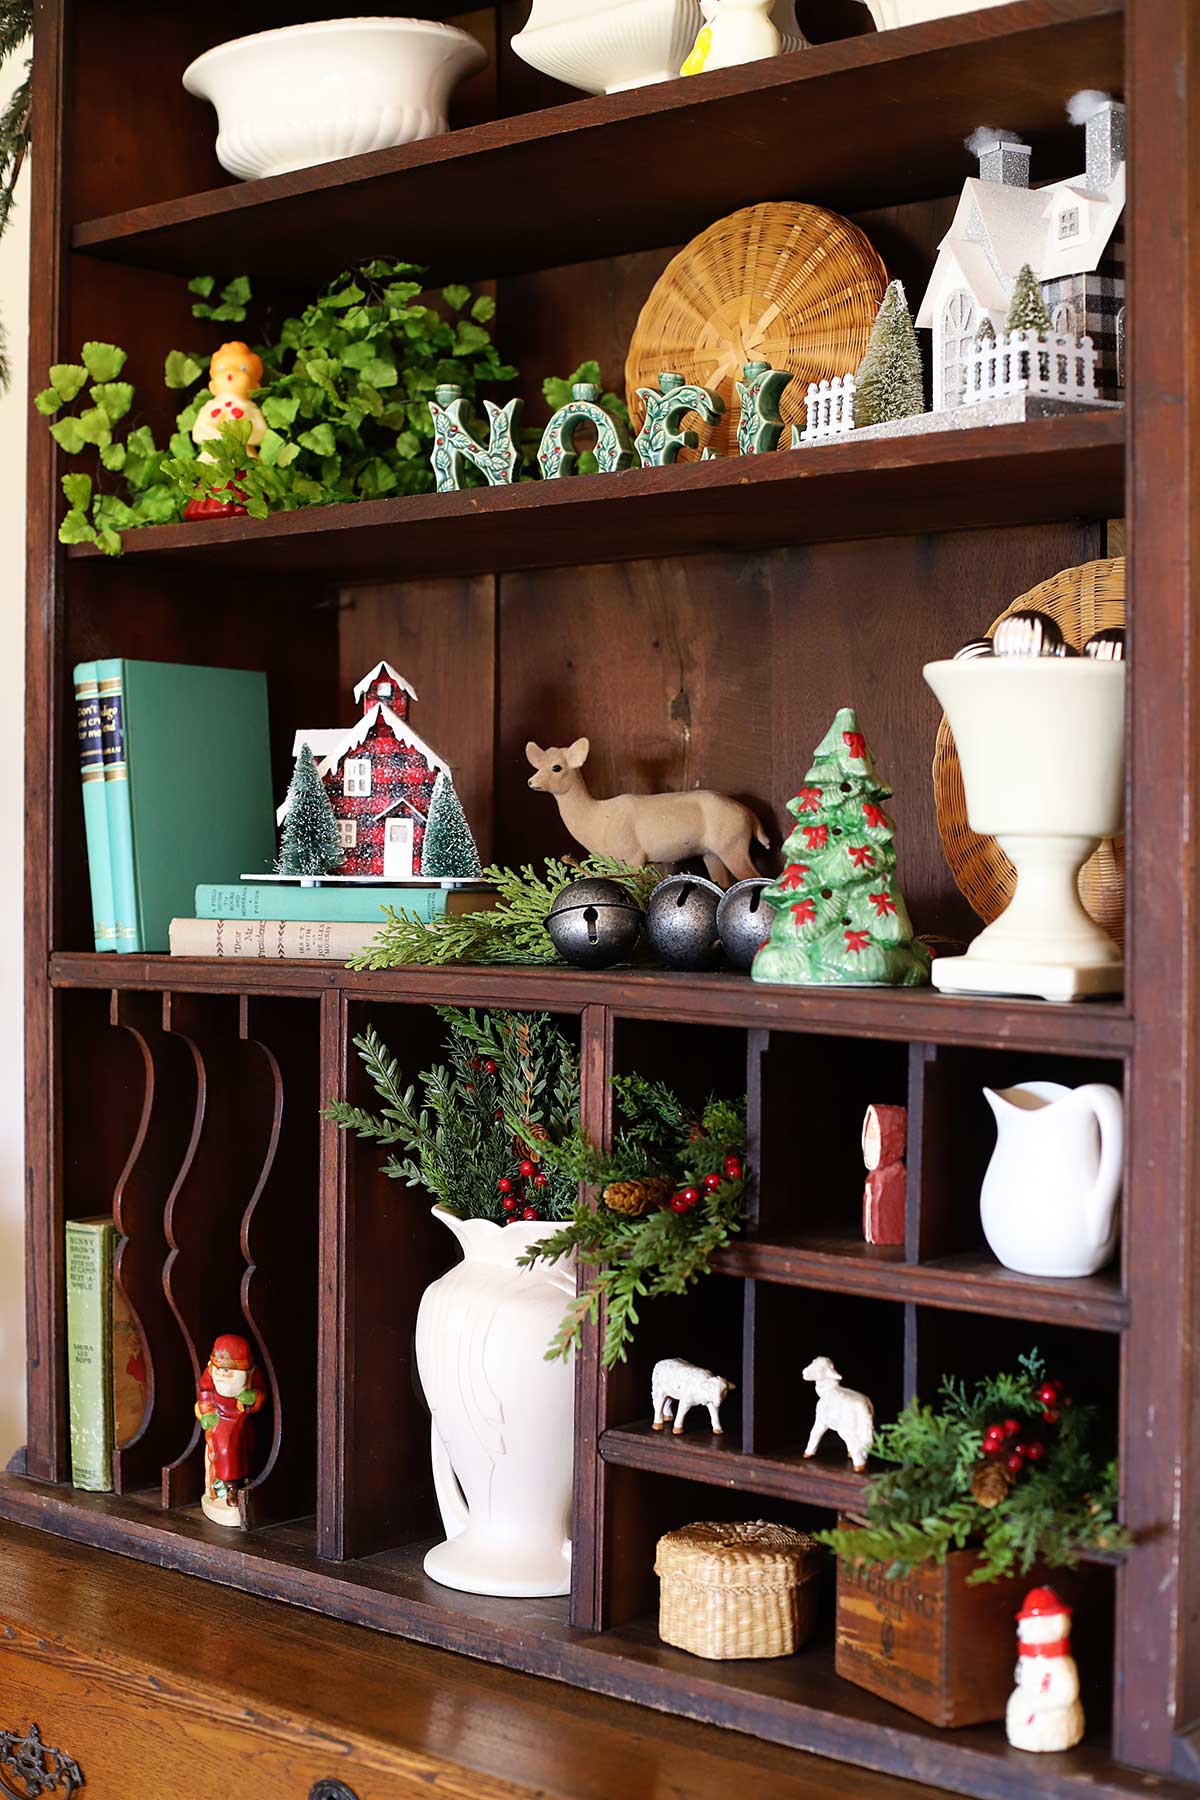 decorating the hutch with vintage Christmas decor